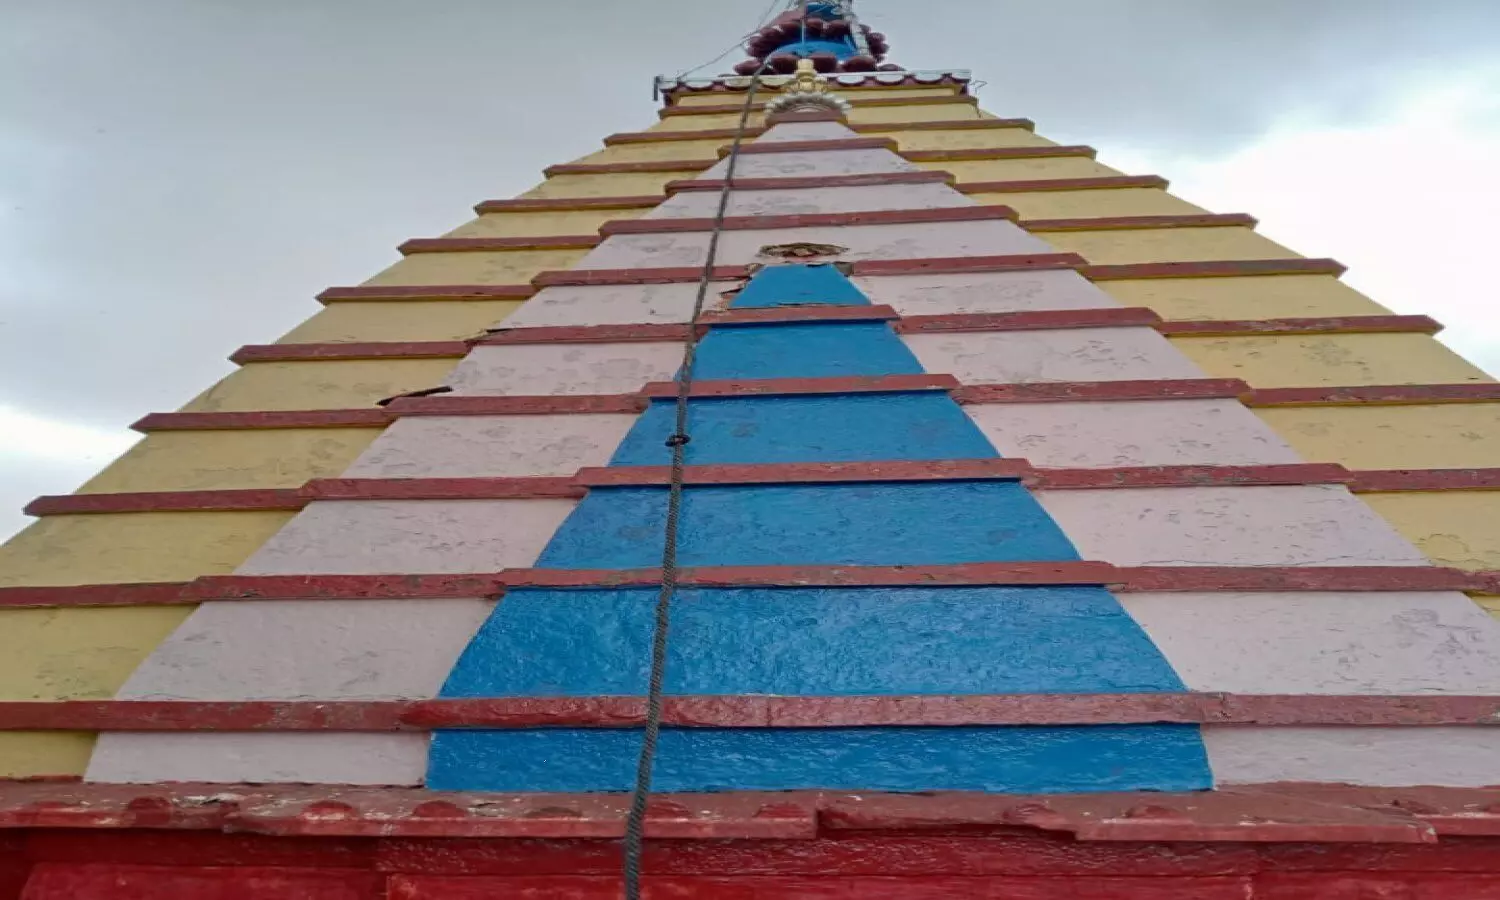 Temple situated at sonbhadra